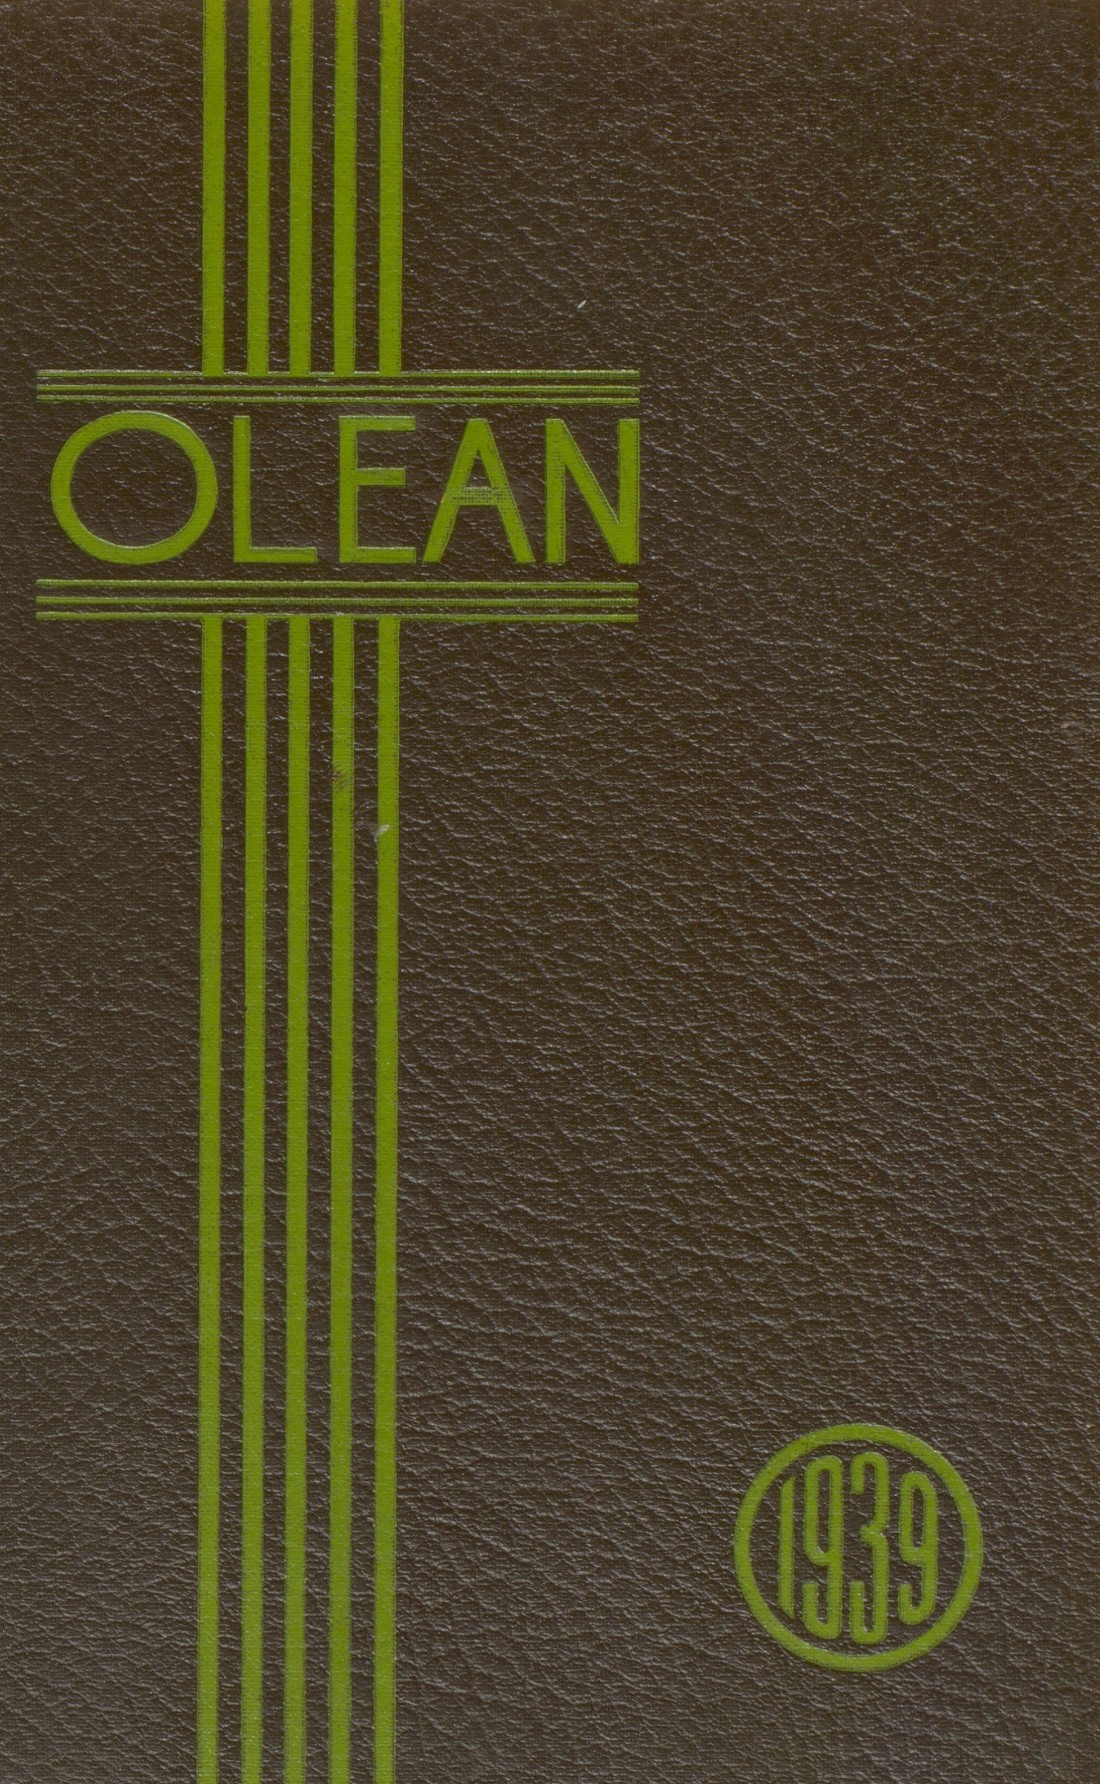 1939 yearbook from Oley Valley High School from Oley, Pennsylvania